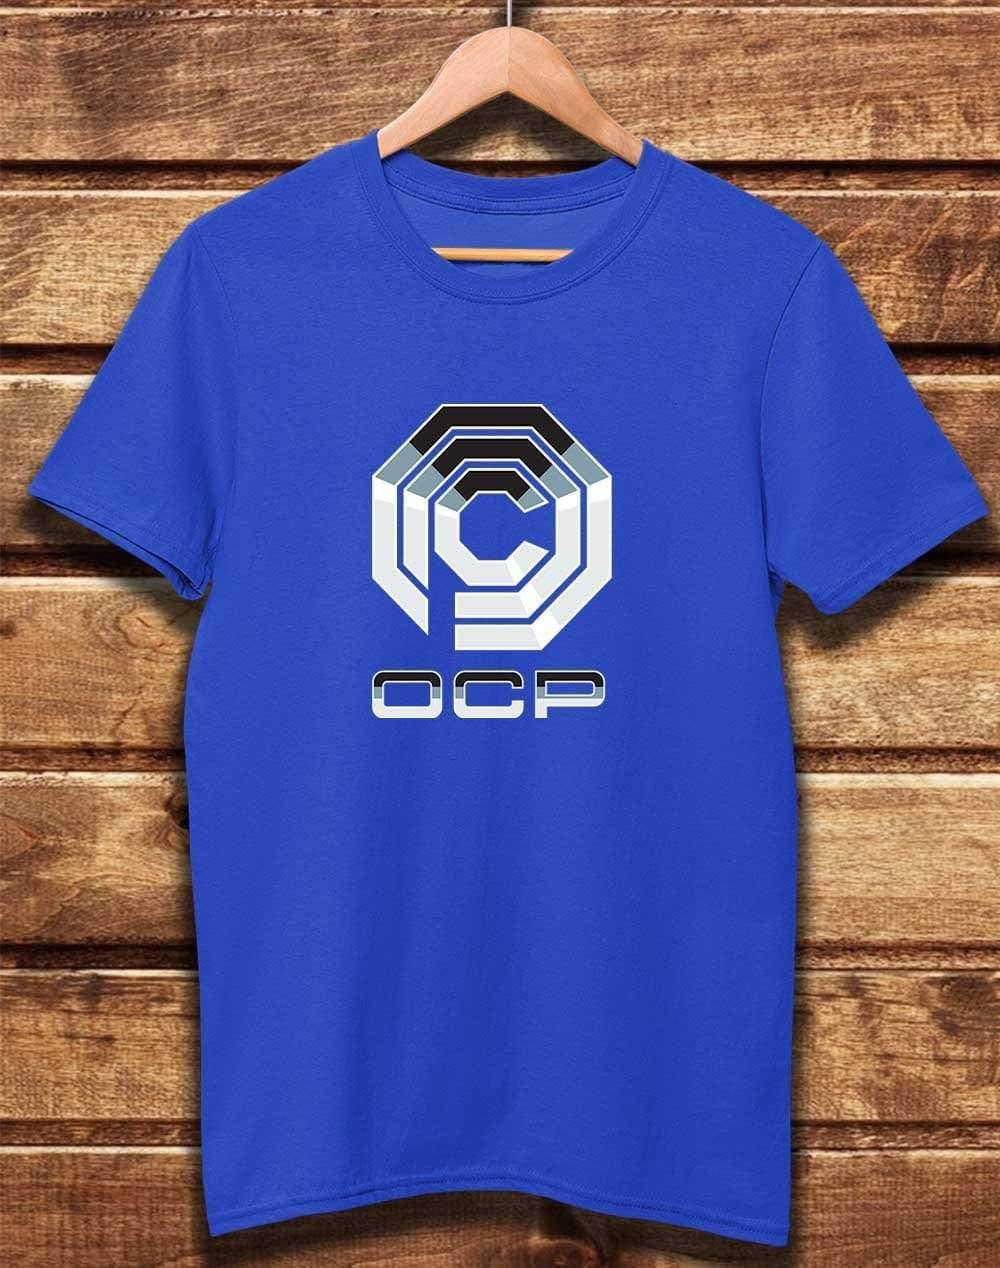 DELUXE Omni Consumer Products OCP Organic Cotton T-Shirt XS / Bright Blue  - Off World Tees